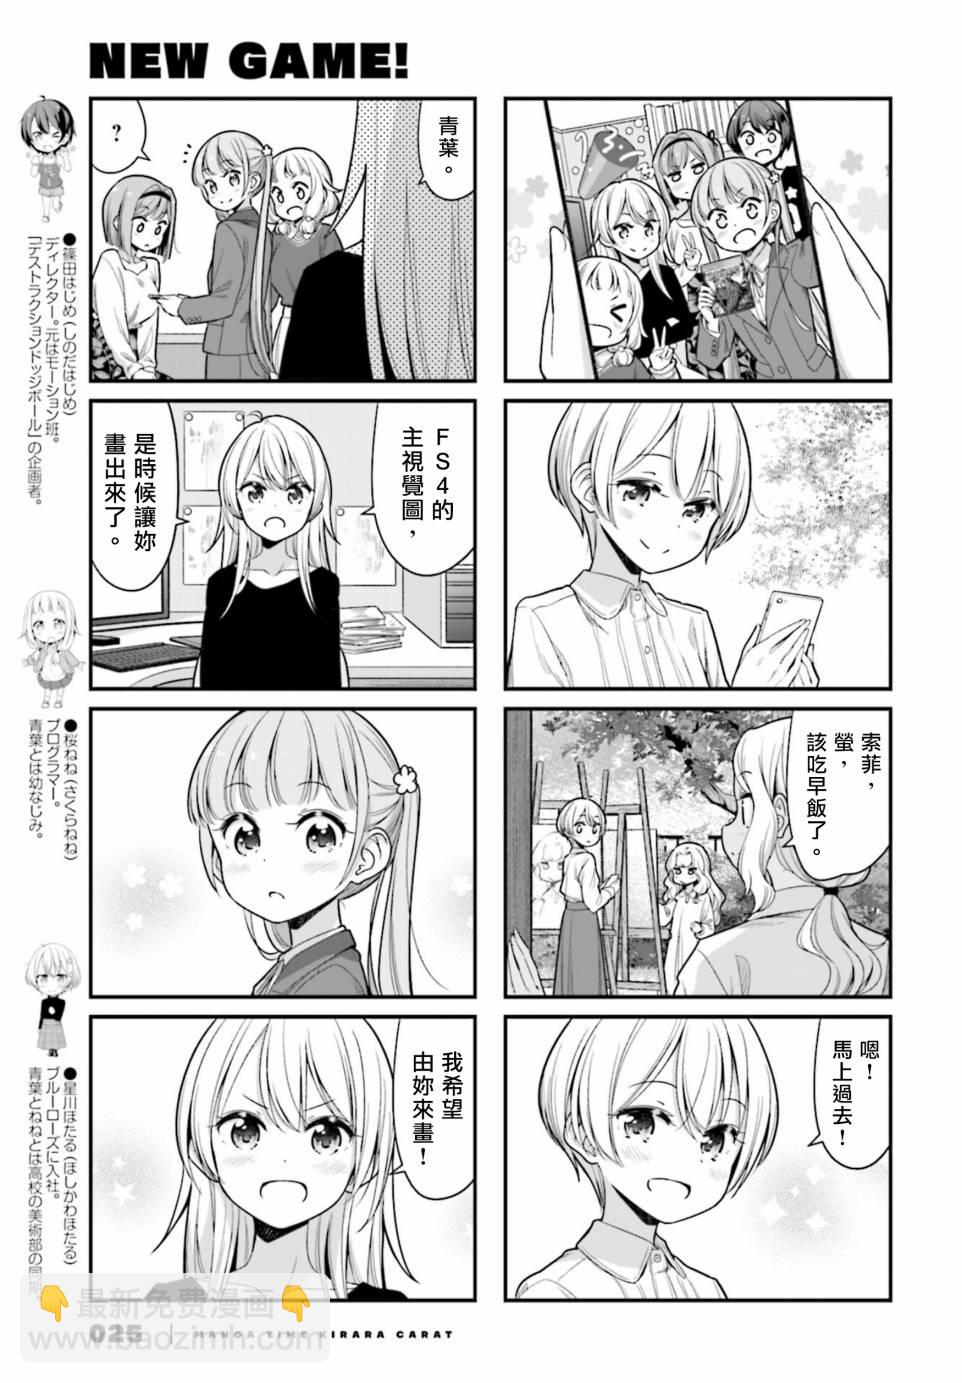 NEW GAME! - 135 第135話 - 1